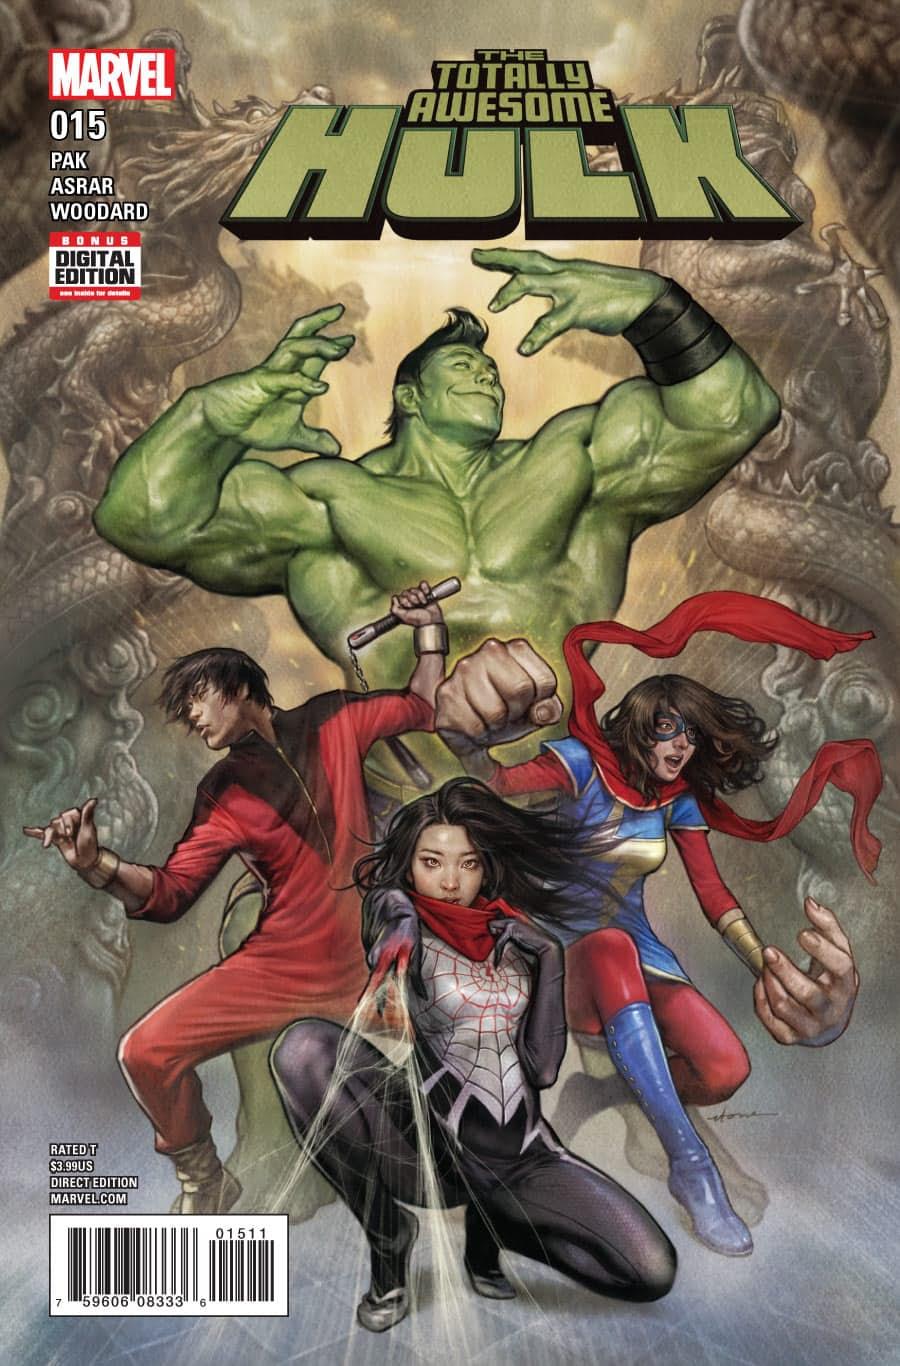 Totally Awesome Hulk Vol. 1 #15